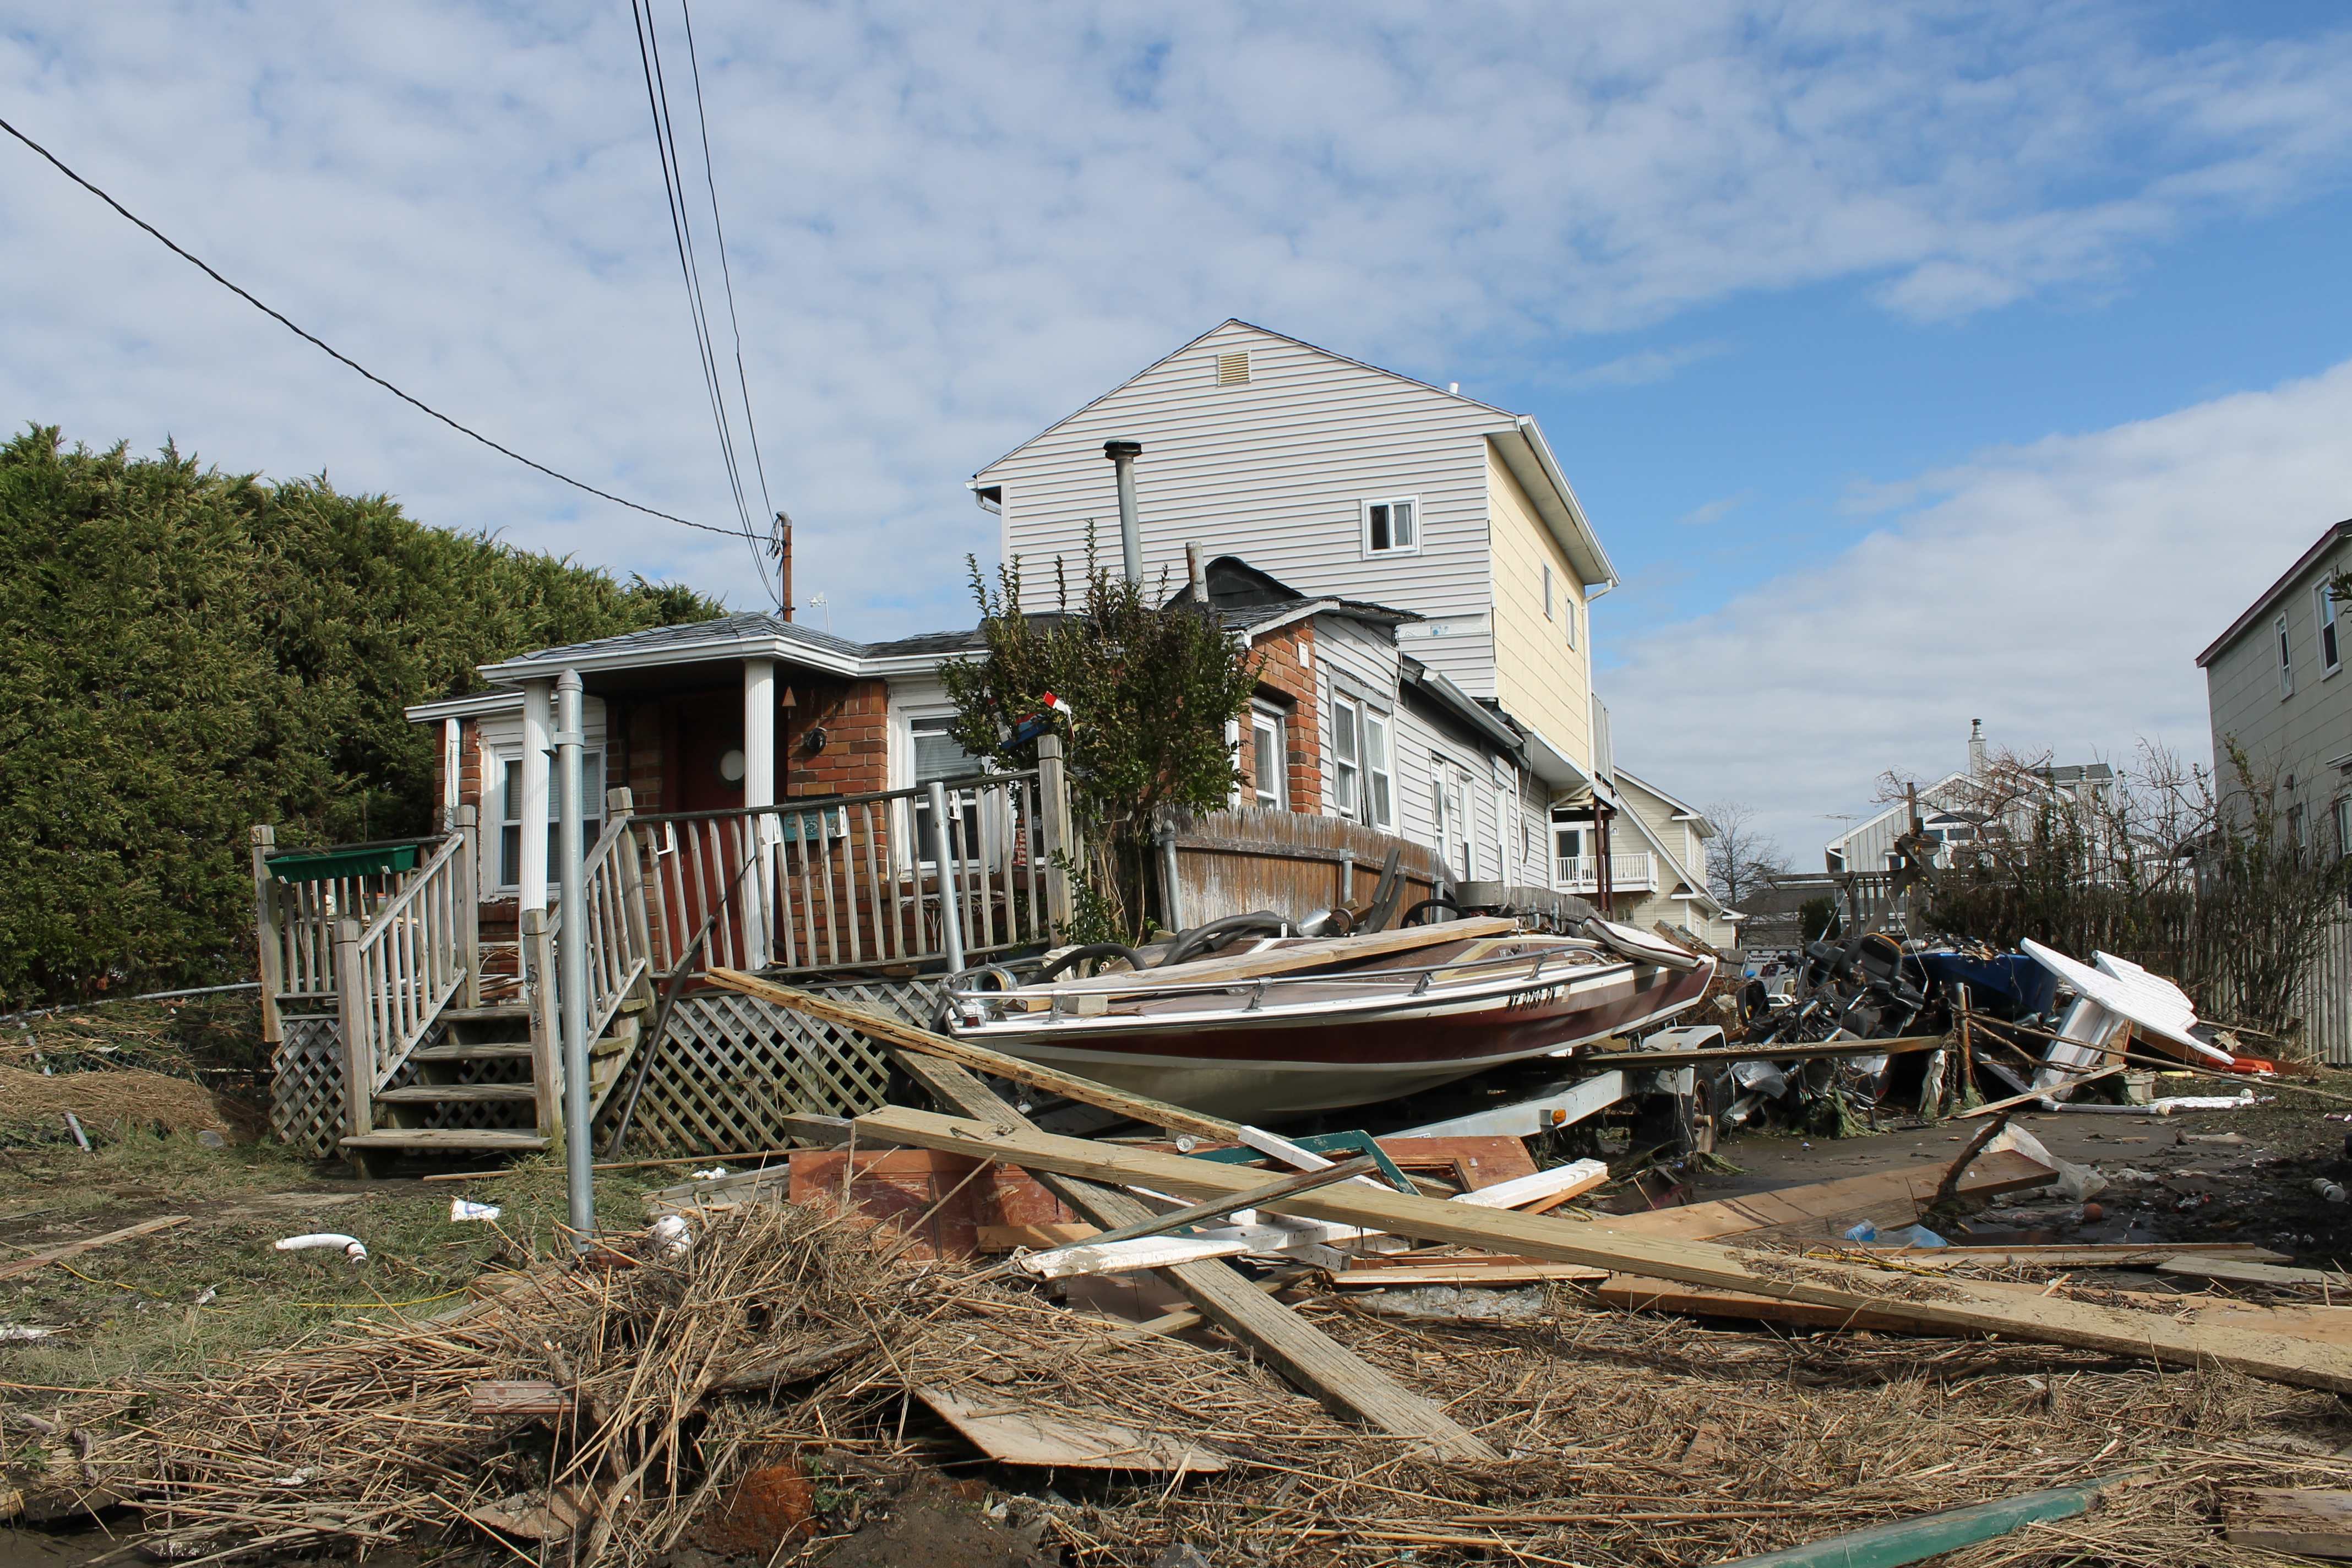 House in Lindenhurst where a dangerous storm surge destroyed several homes in the south shore village. (Photo credit: Rashed Mian)